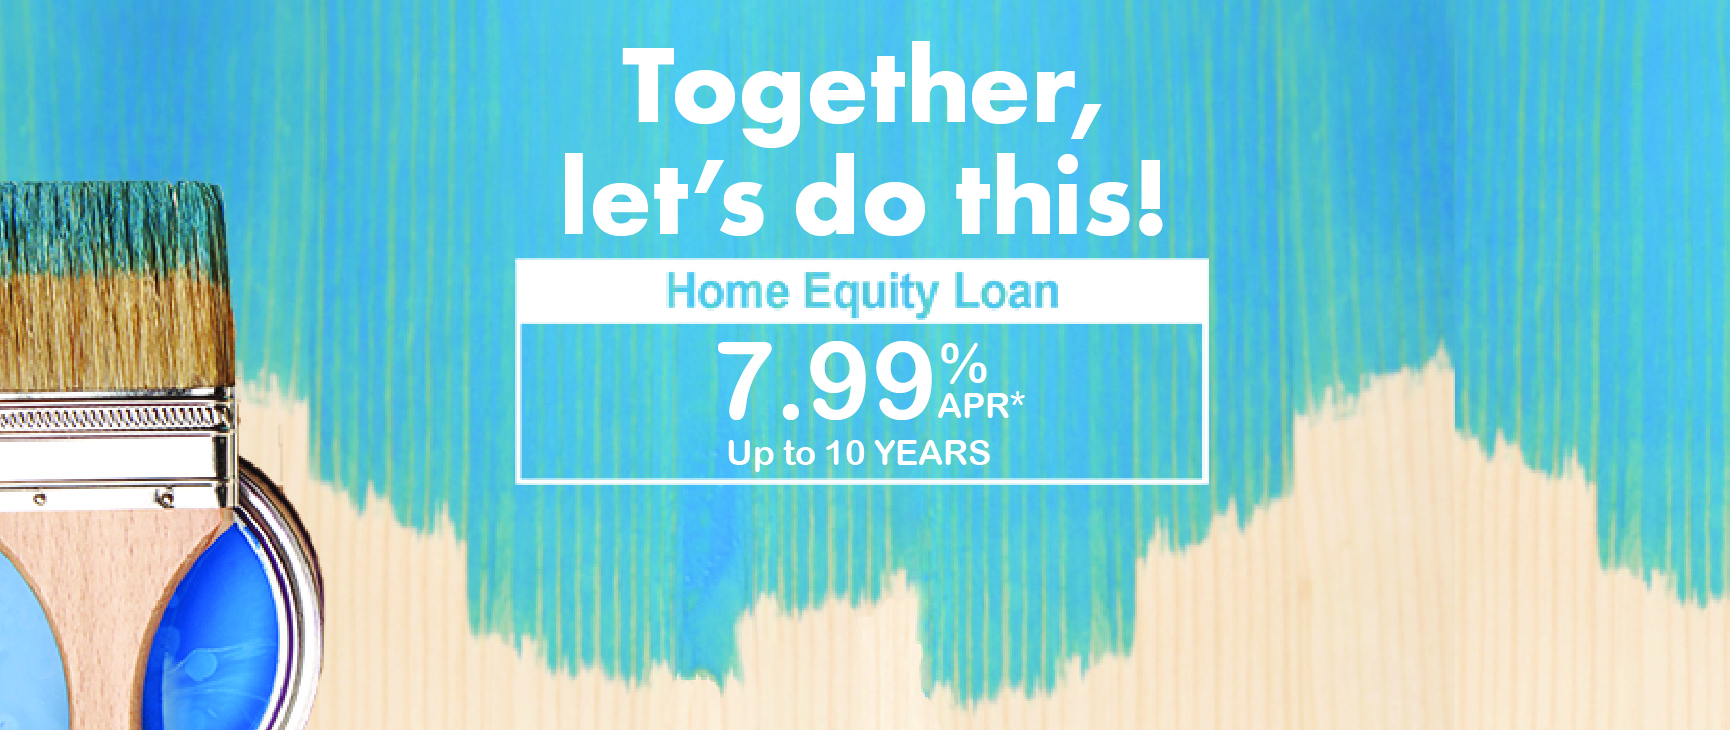 Home Equity Loans 7.99%